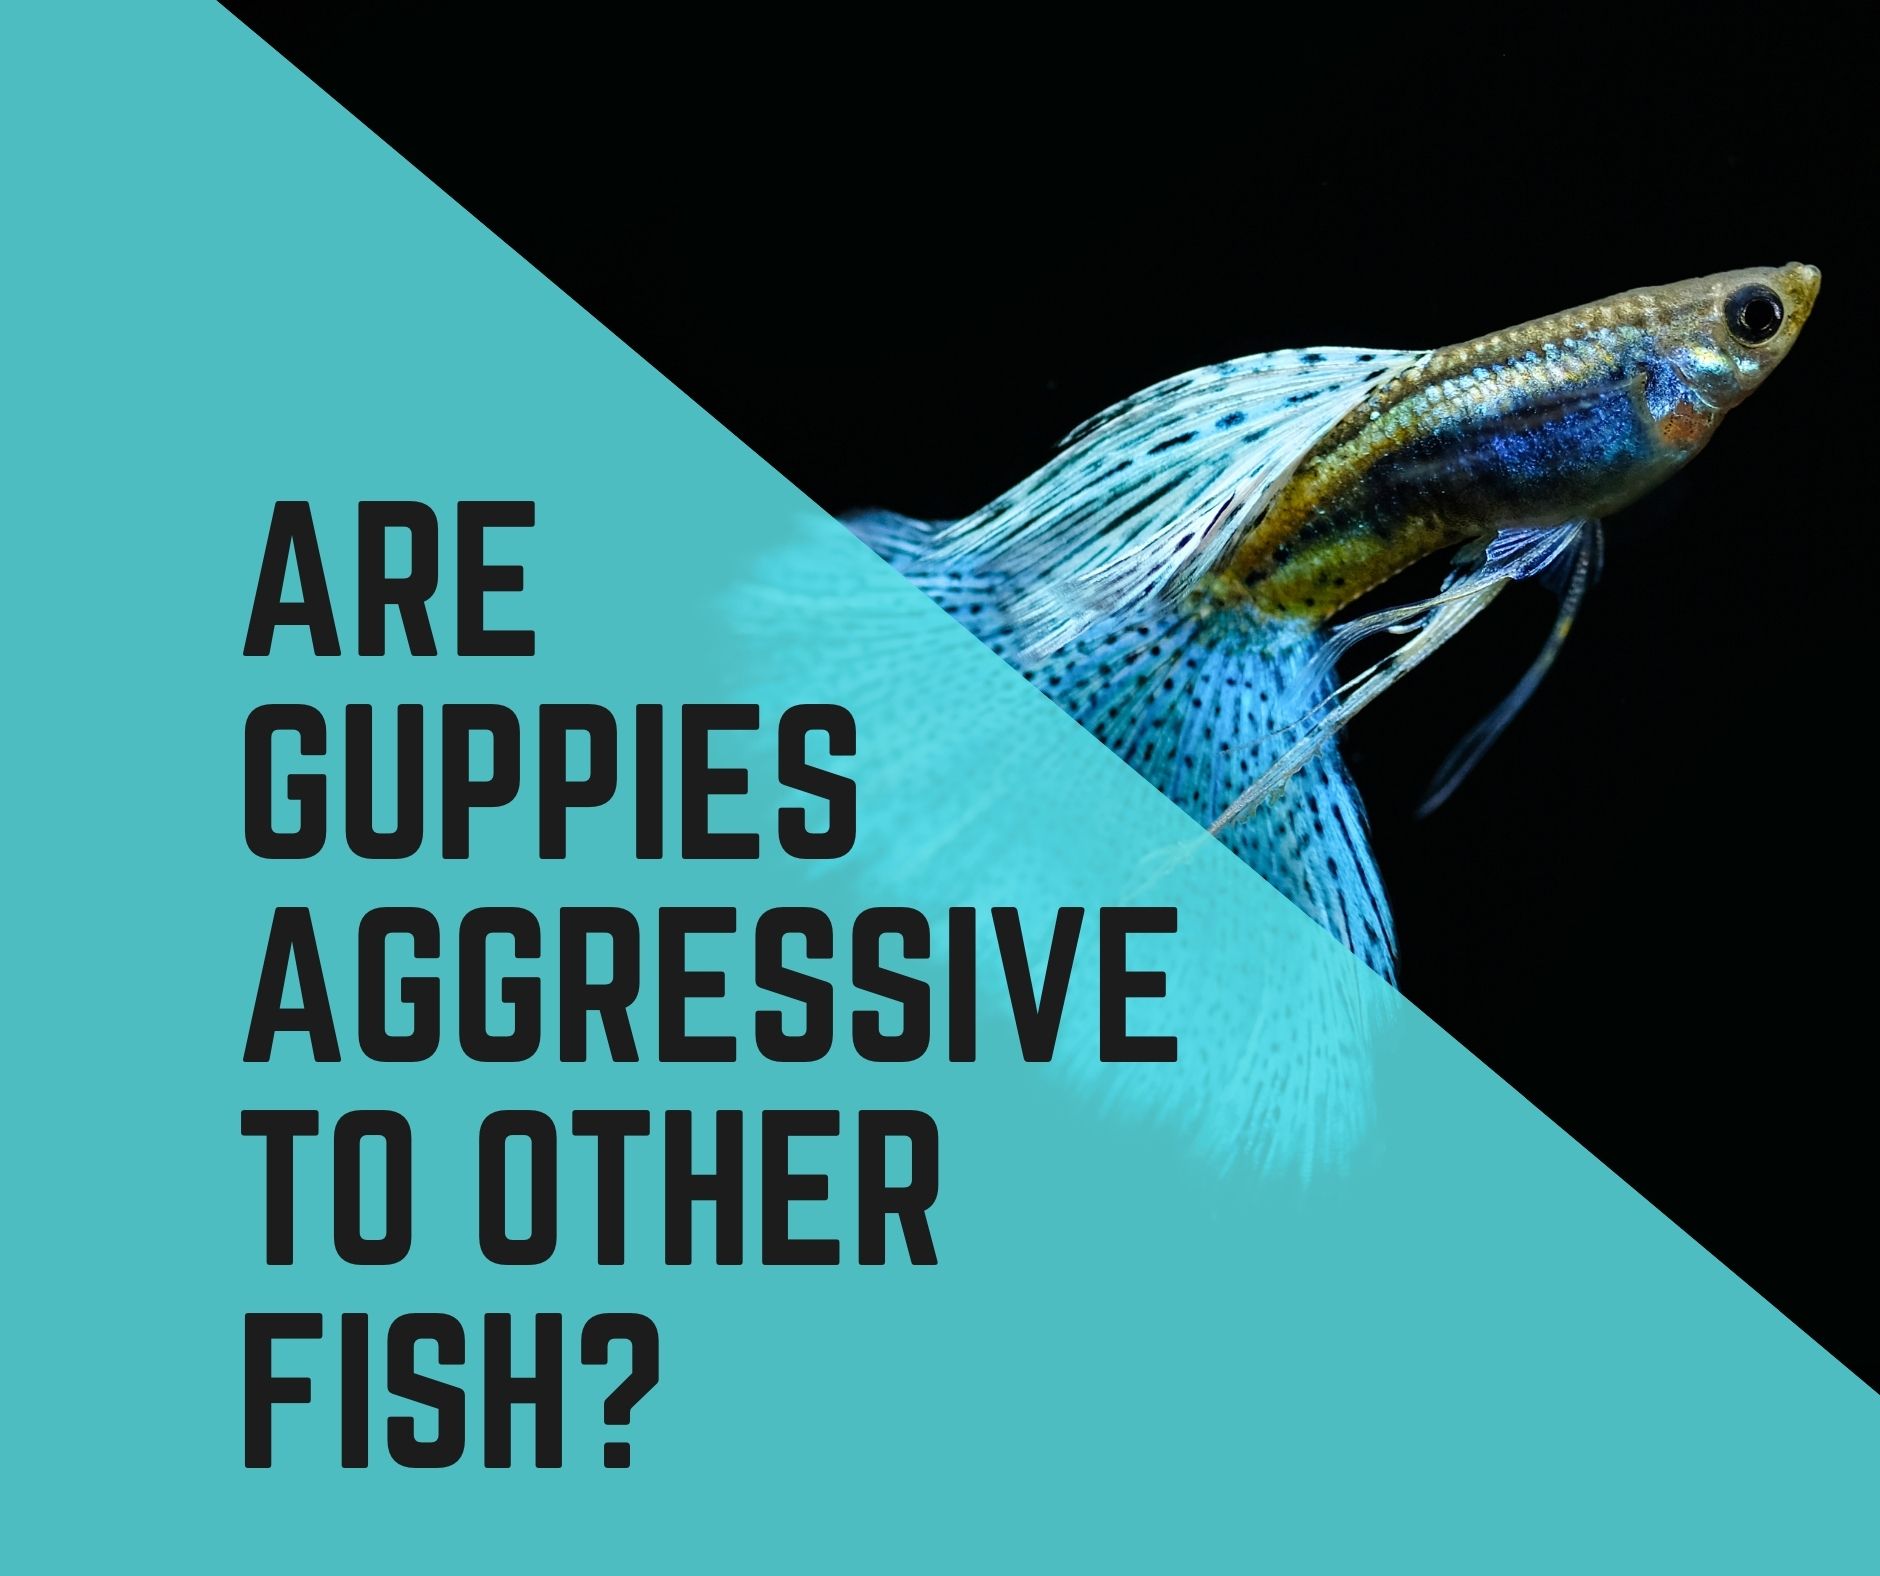 Are Guppies Aggressive To Other Fish?